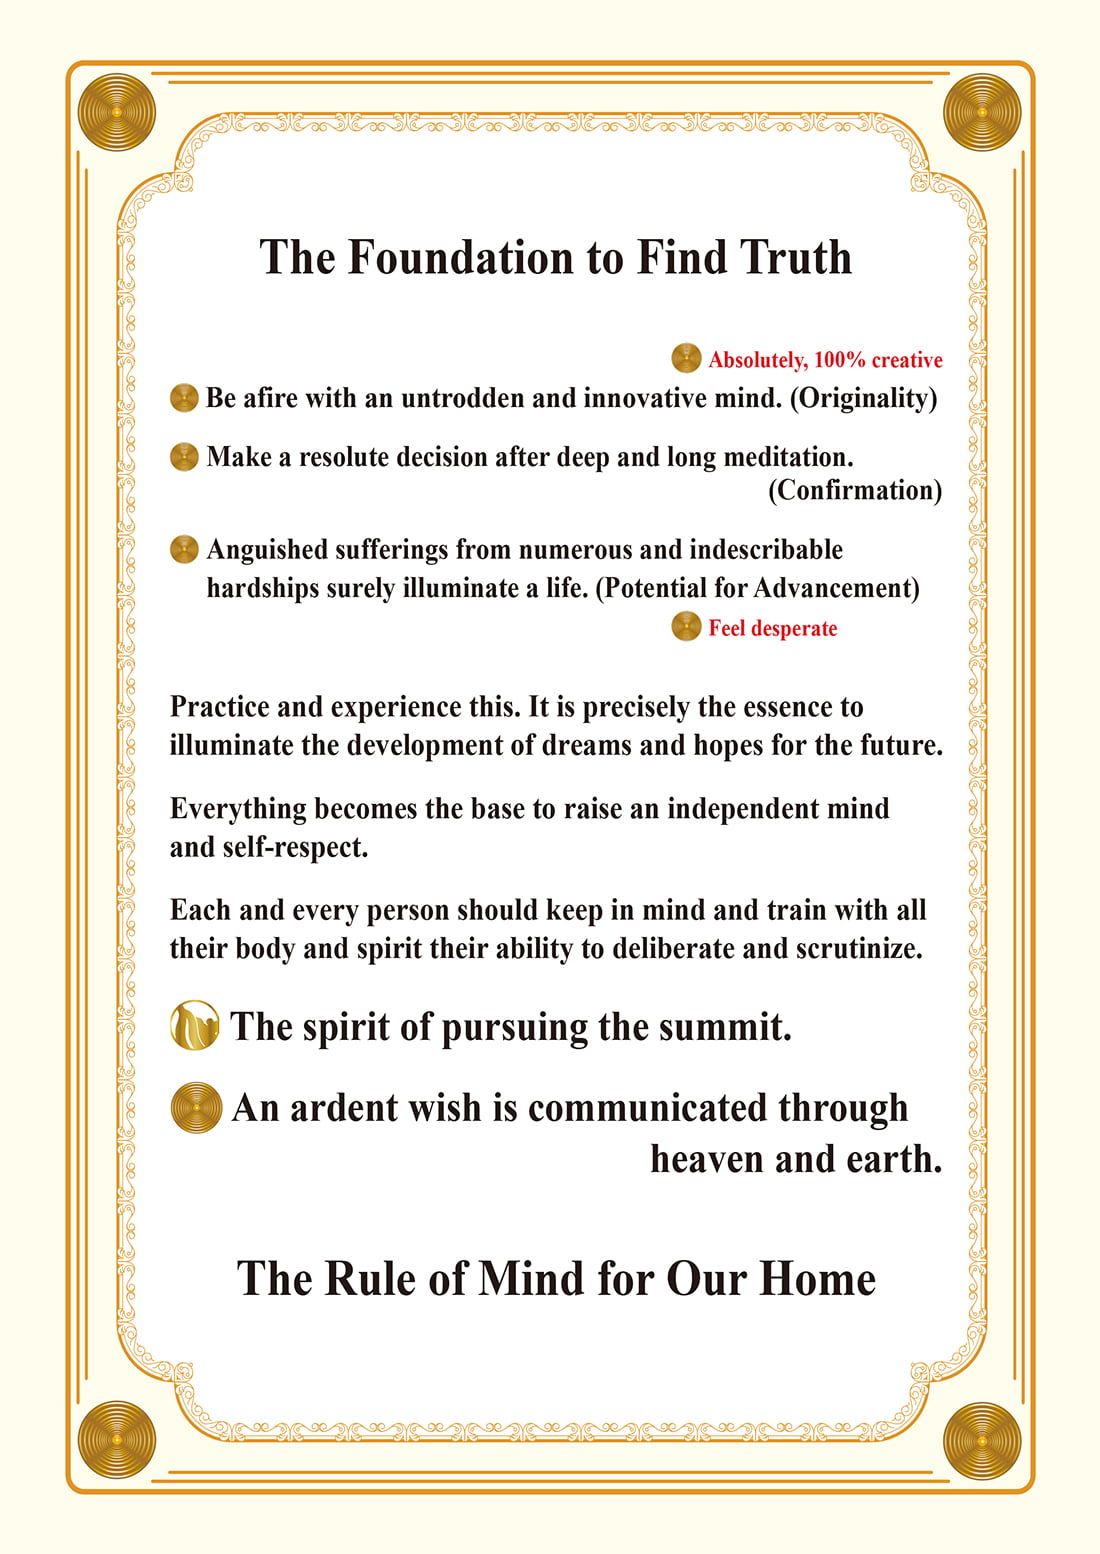 The Foundation to Find Truth